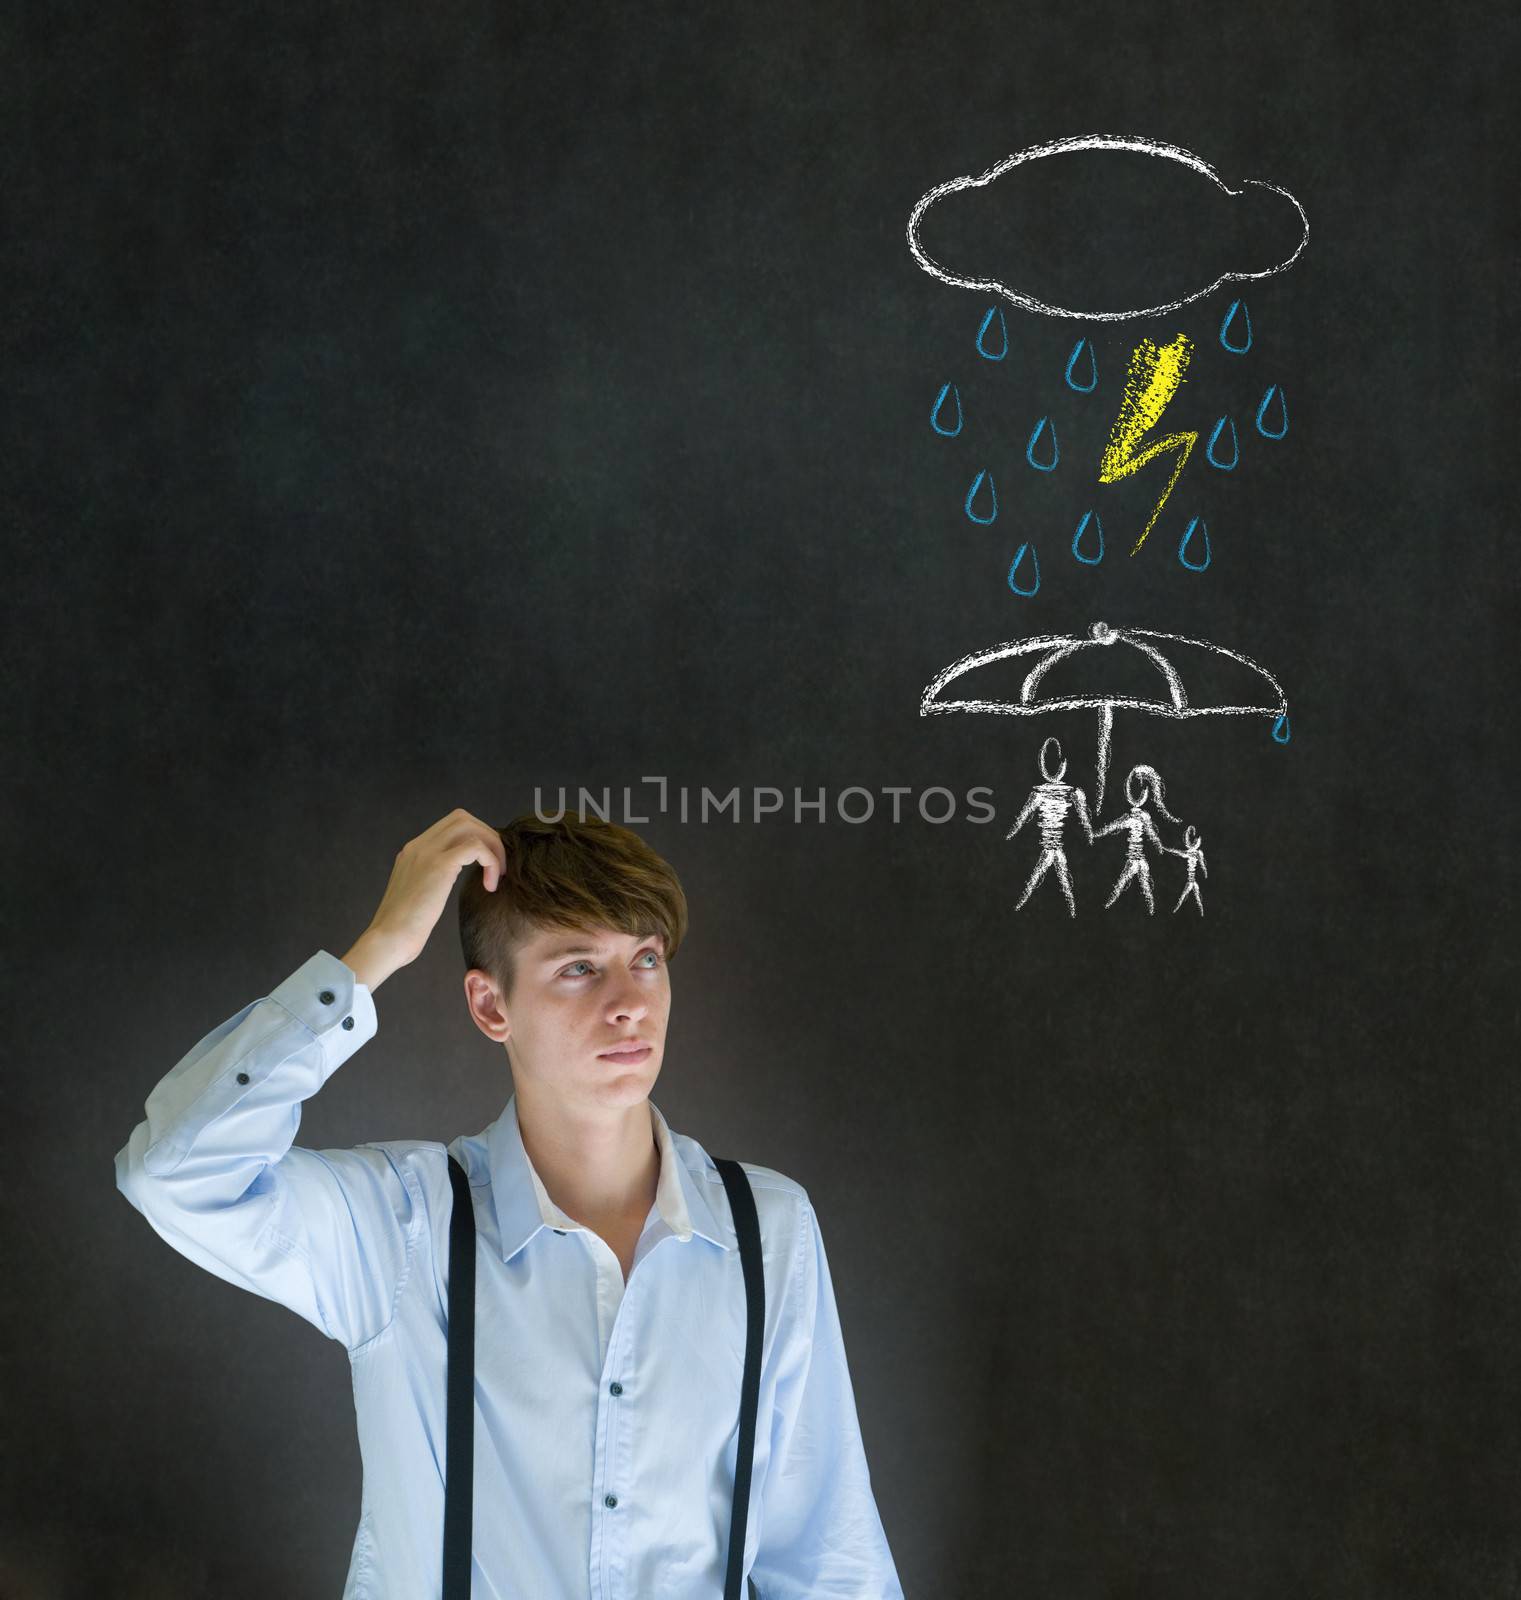 Insurance businessman thinking about protecting family from natural disaster on blackboard background